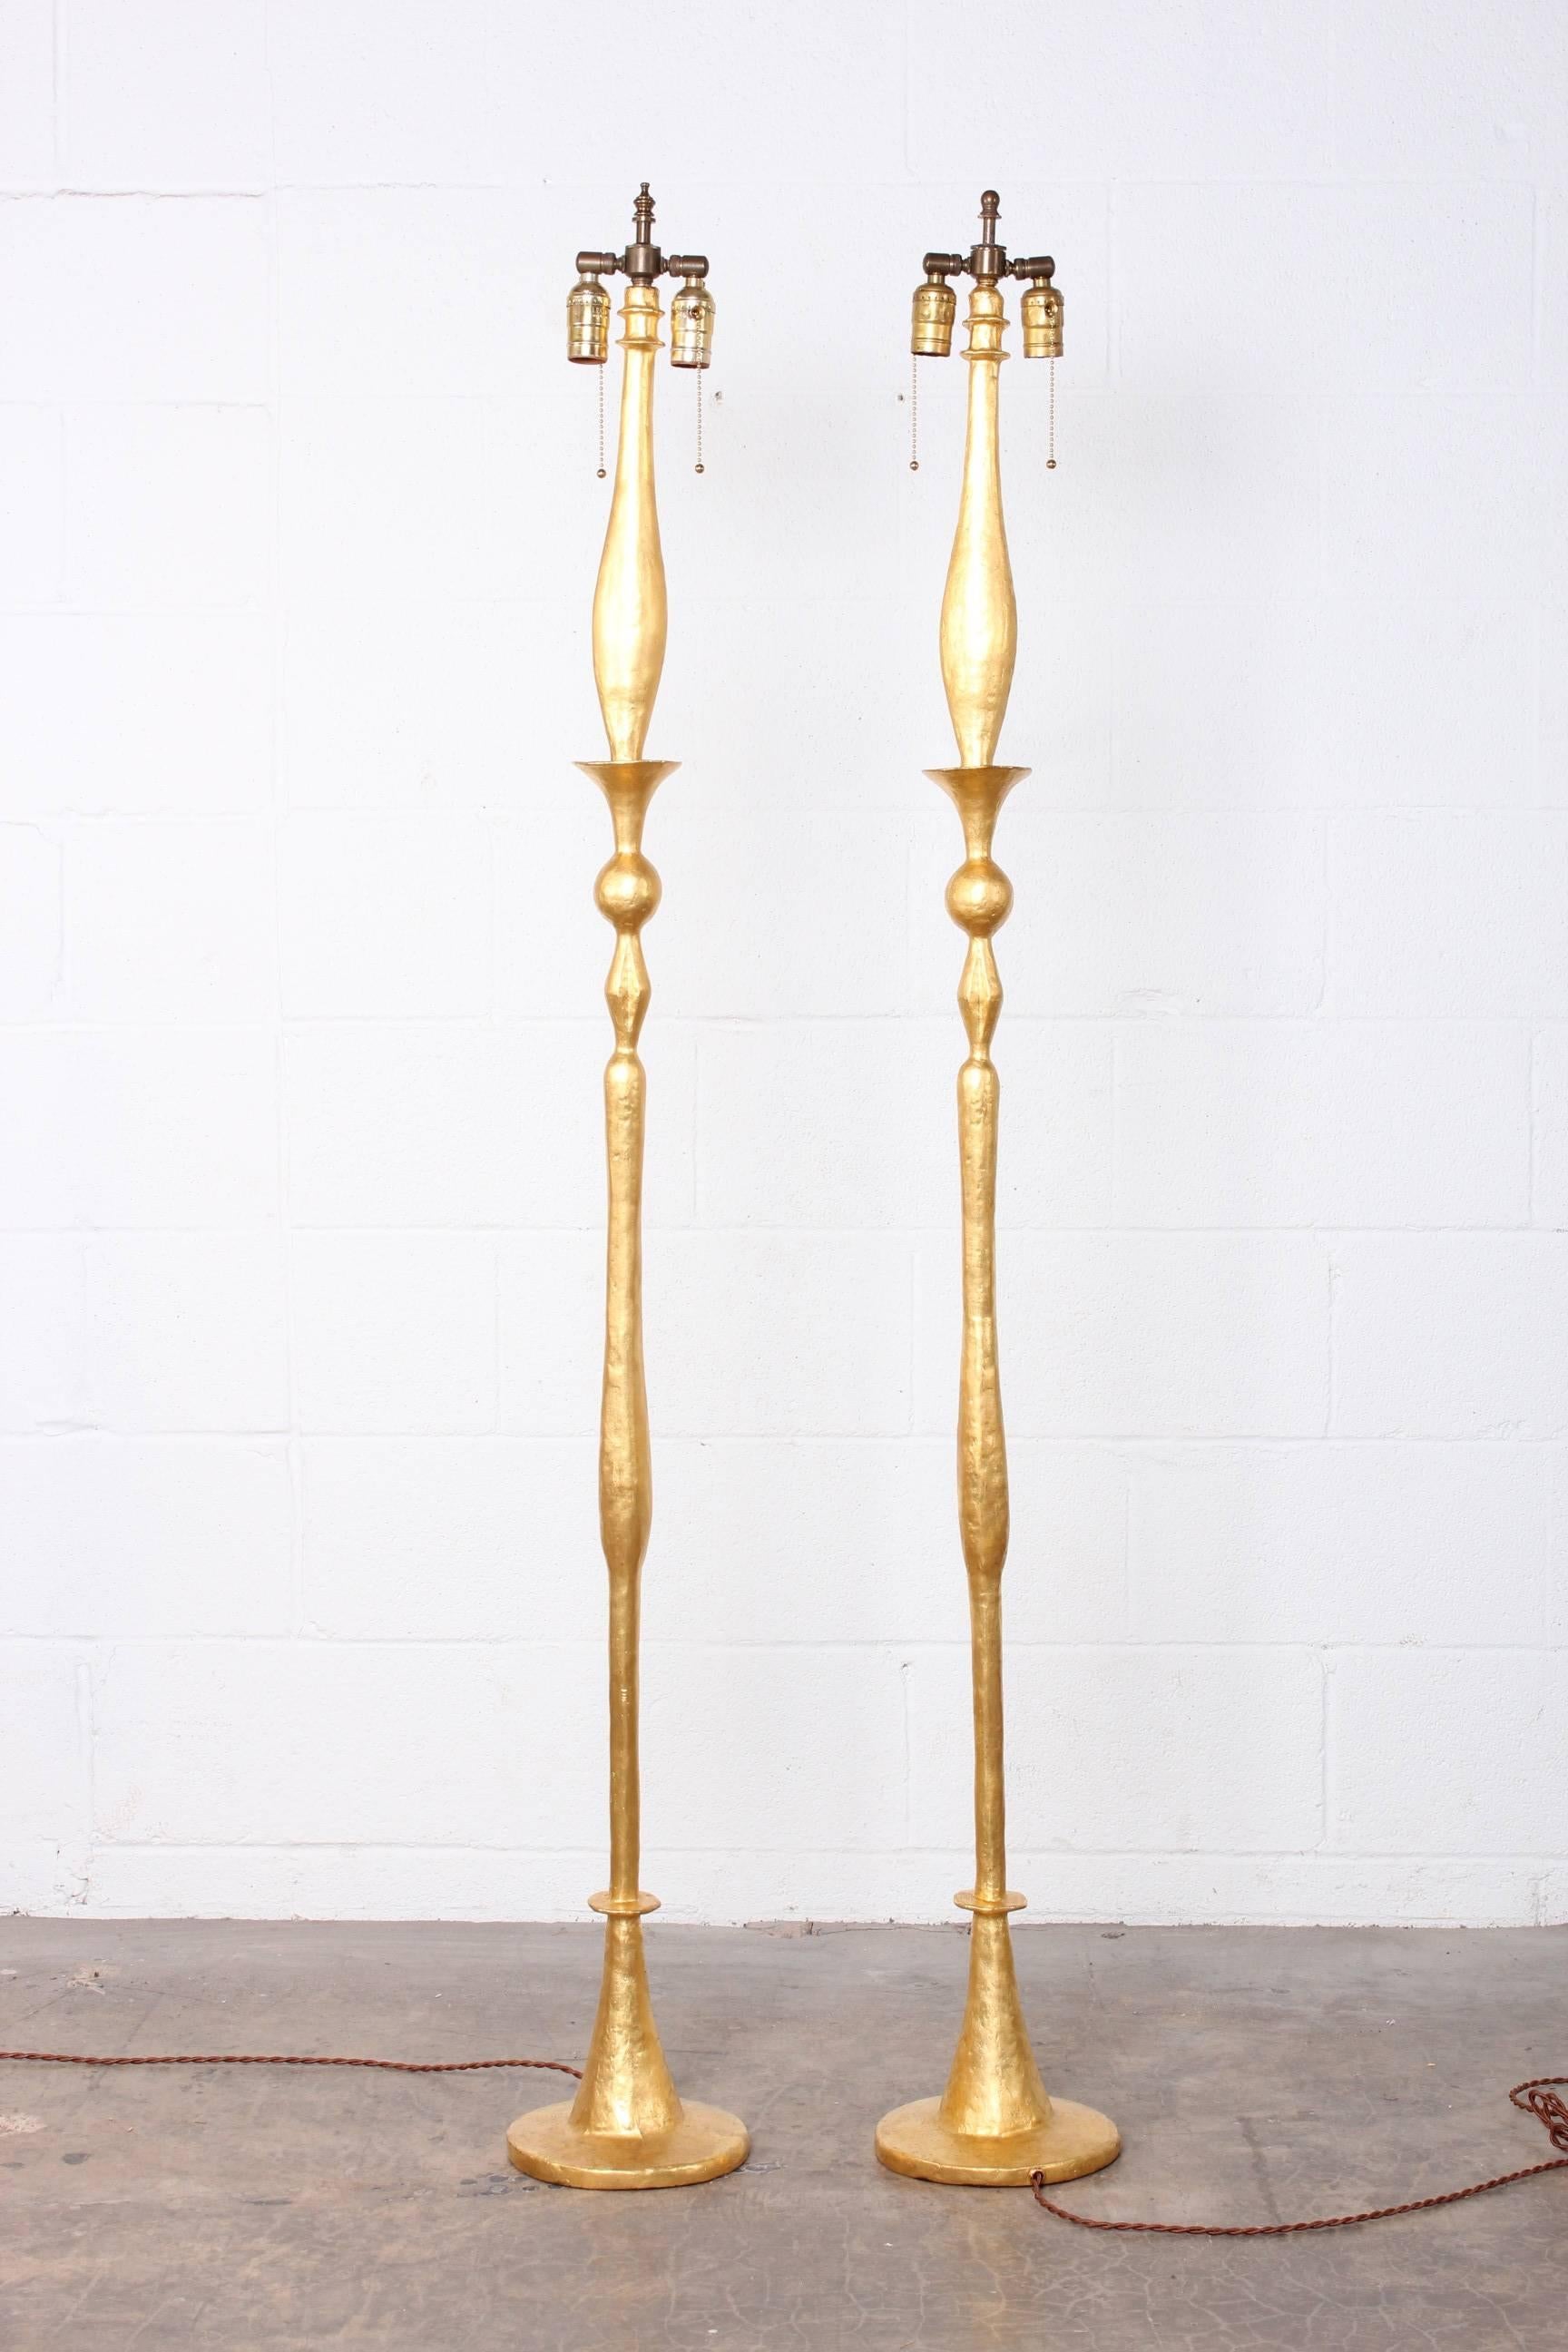 A pair of authorized limited edition reissue floor lamps in gilded solid bronze by Alberto Giacometti from the 1978 Nelson Rockefeller collection.
 